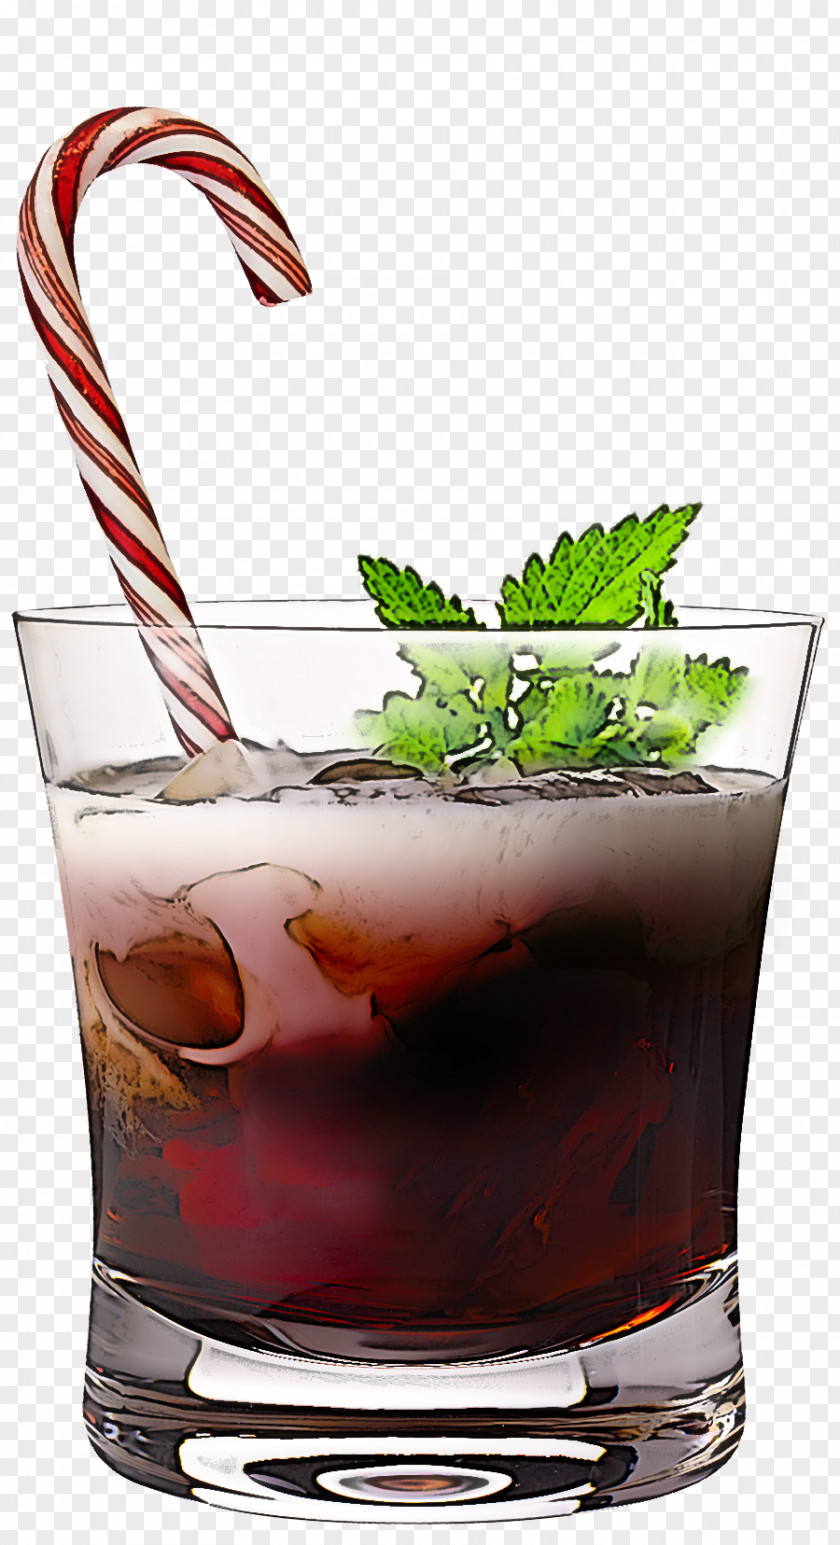 Distilled Beverage Cranberry Juice Drink Cocktail Garnish Non-alcoholic Alcoholic Highball Glass PNG